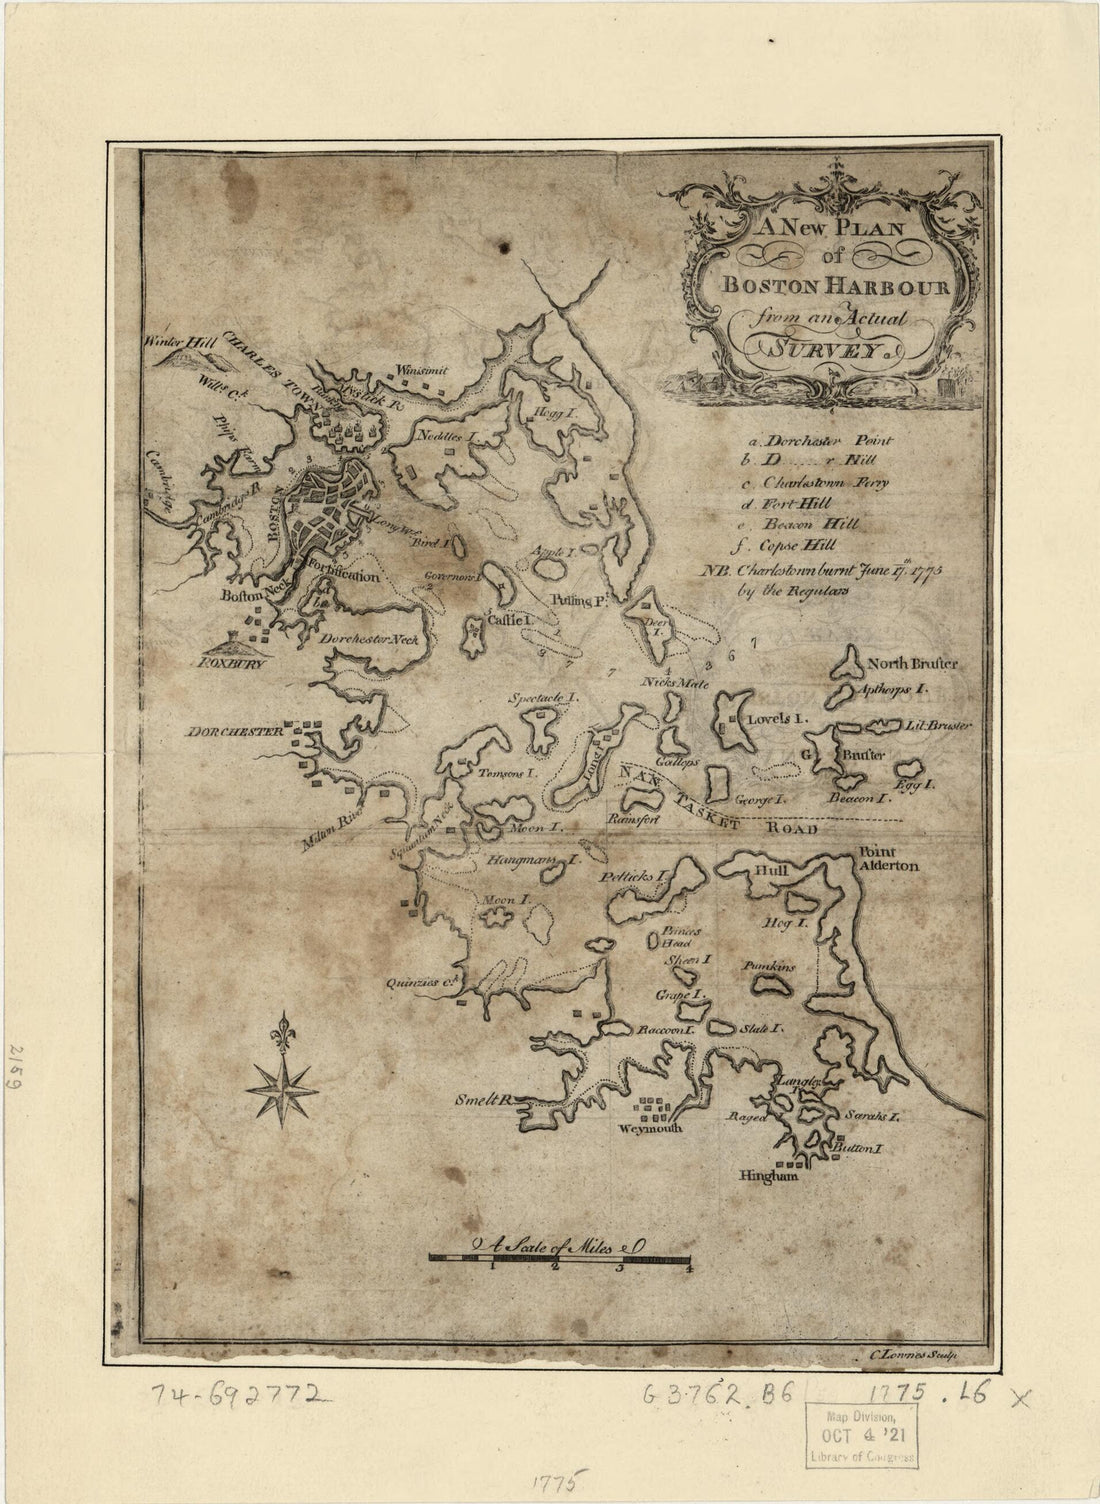 This old map of A New Plan of Boston Harbour from an Actual Survey from 1775 was created by Caleb Lownes in 1775